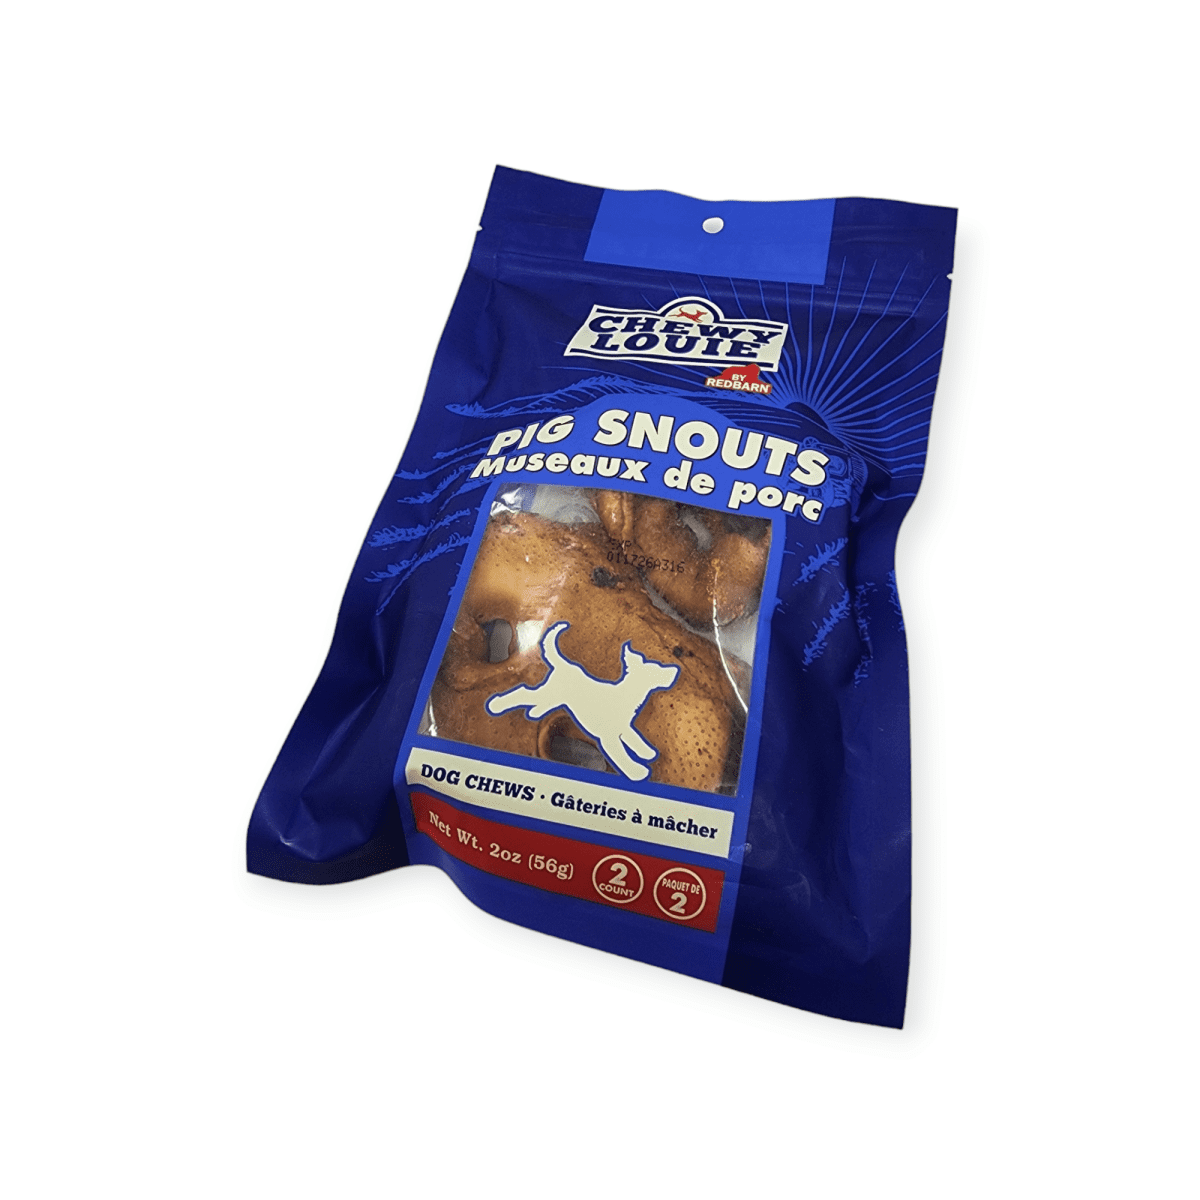 Chewy Louie Pig Snouts Dog Chews (56g)